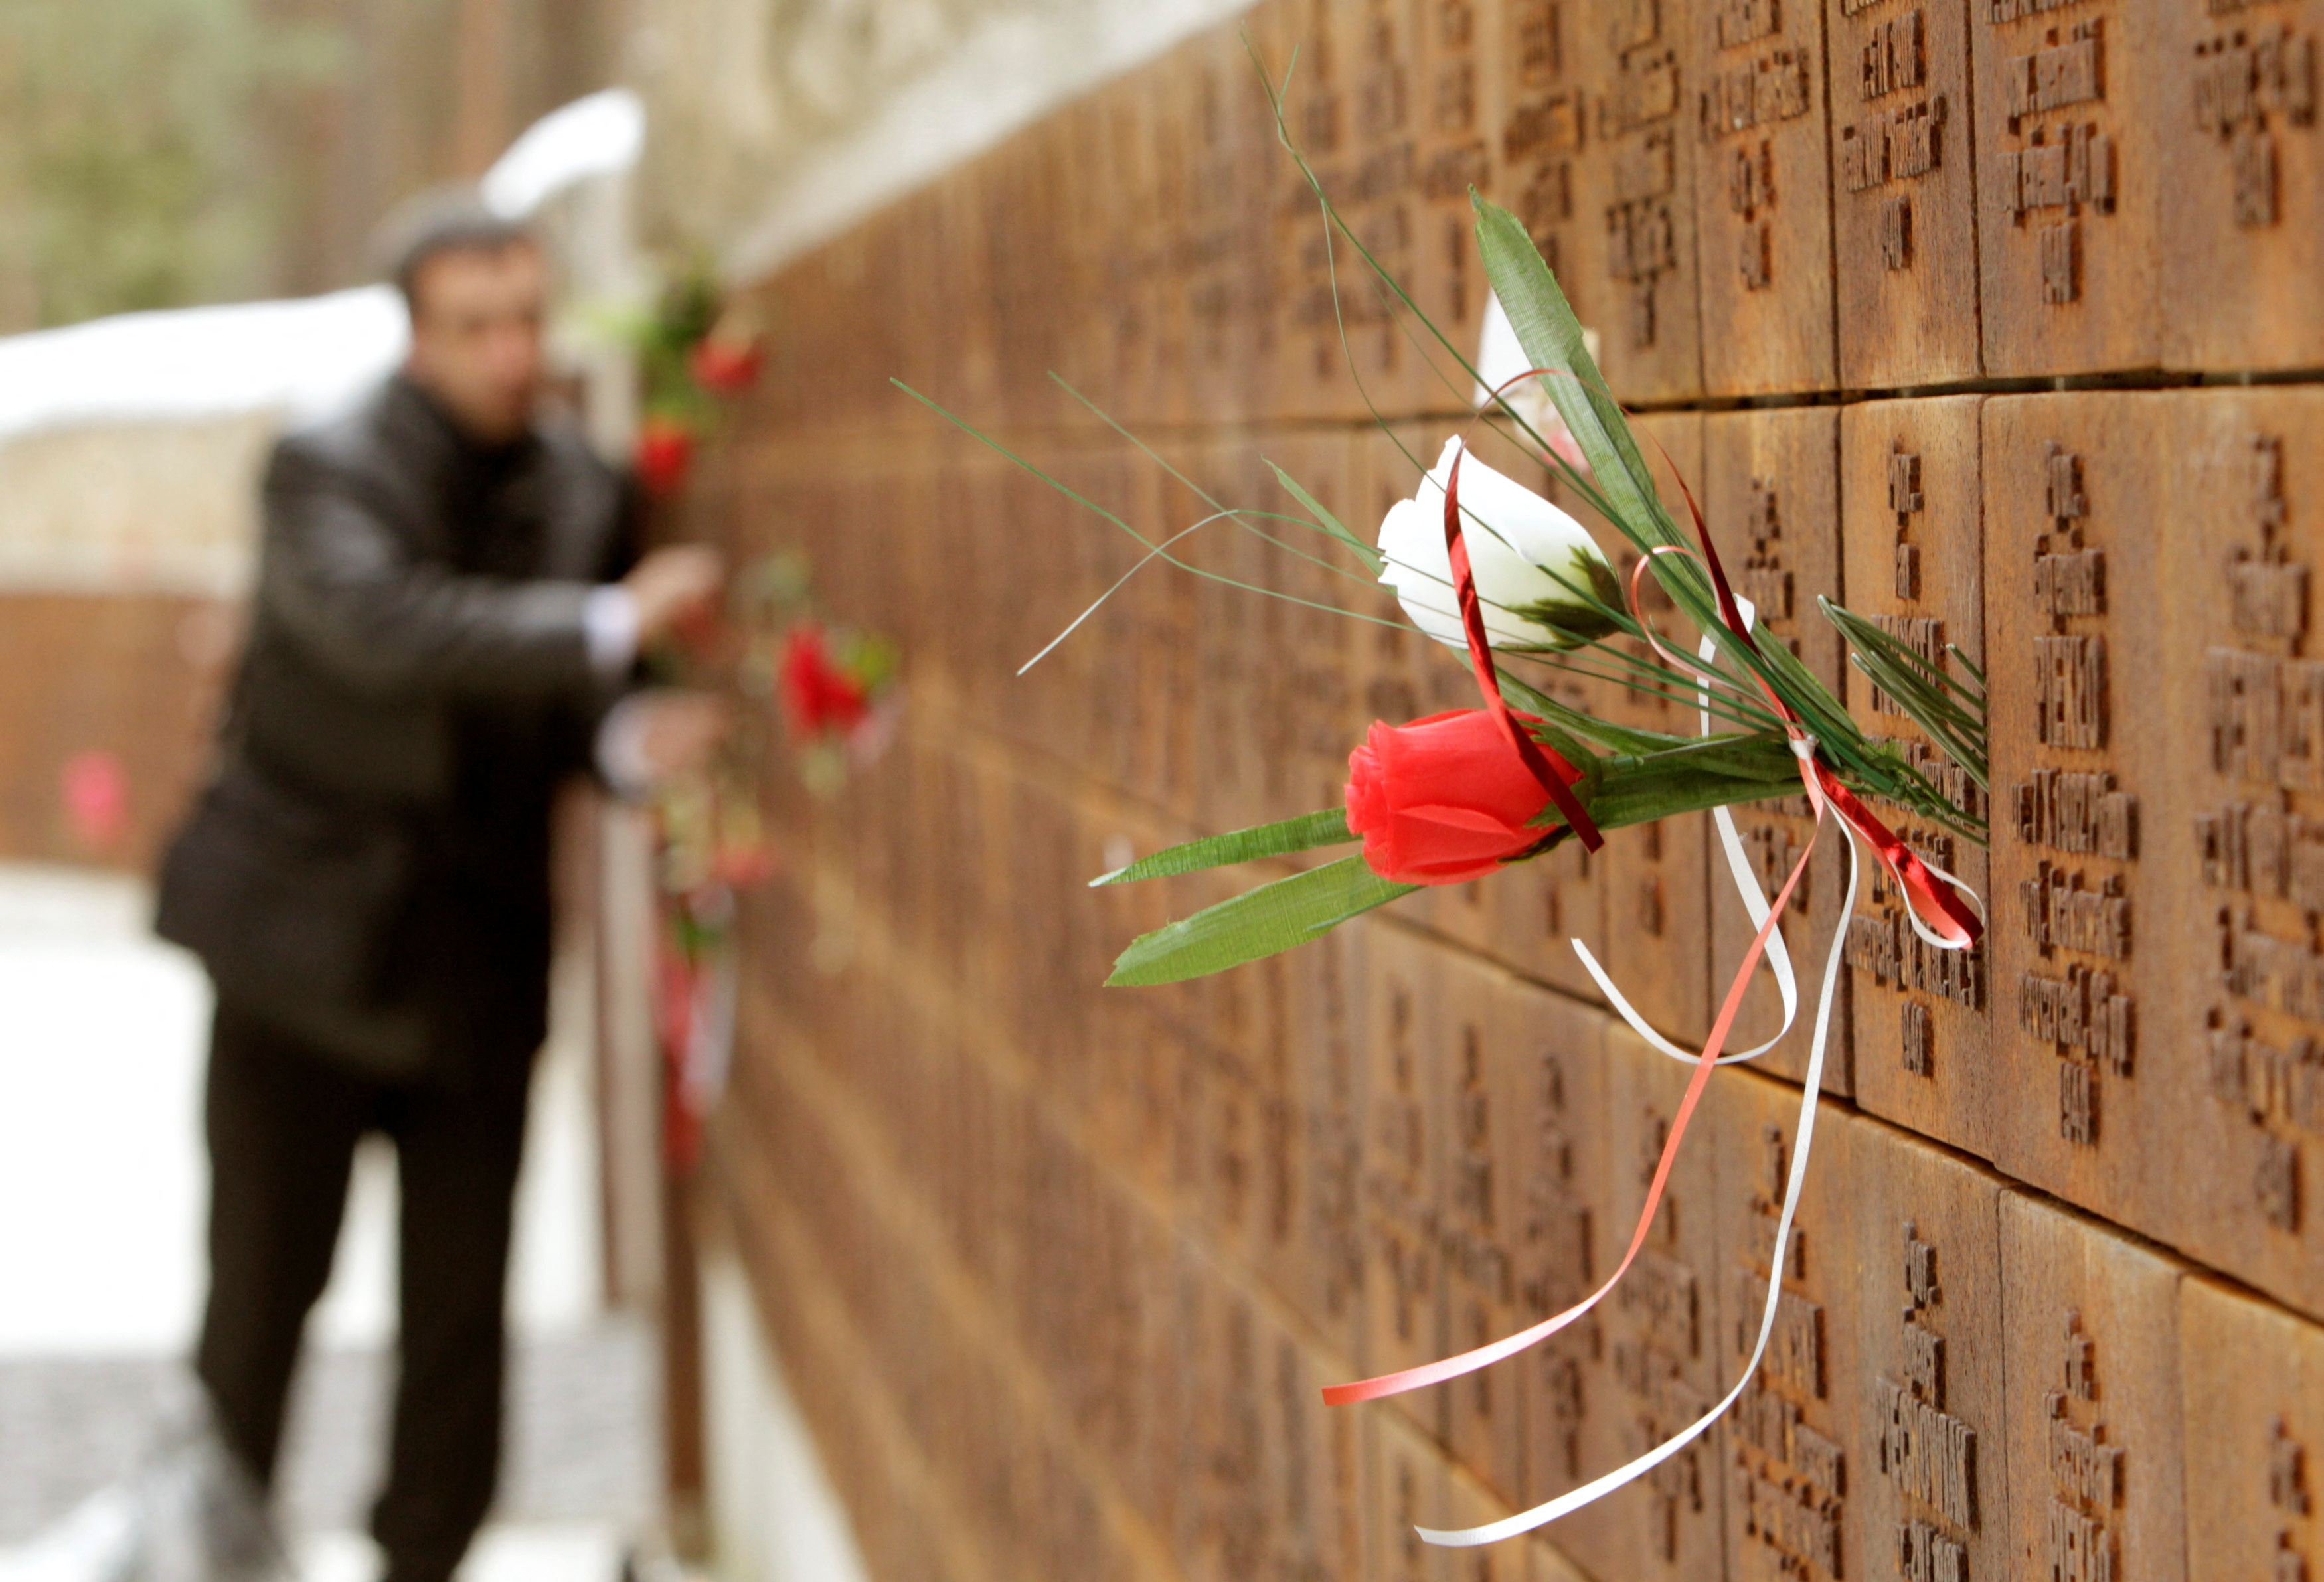 A man puts flowers into a wall with names of killed Polish officers during a commemoration ceremony at a memorial complex in Katyn